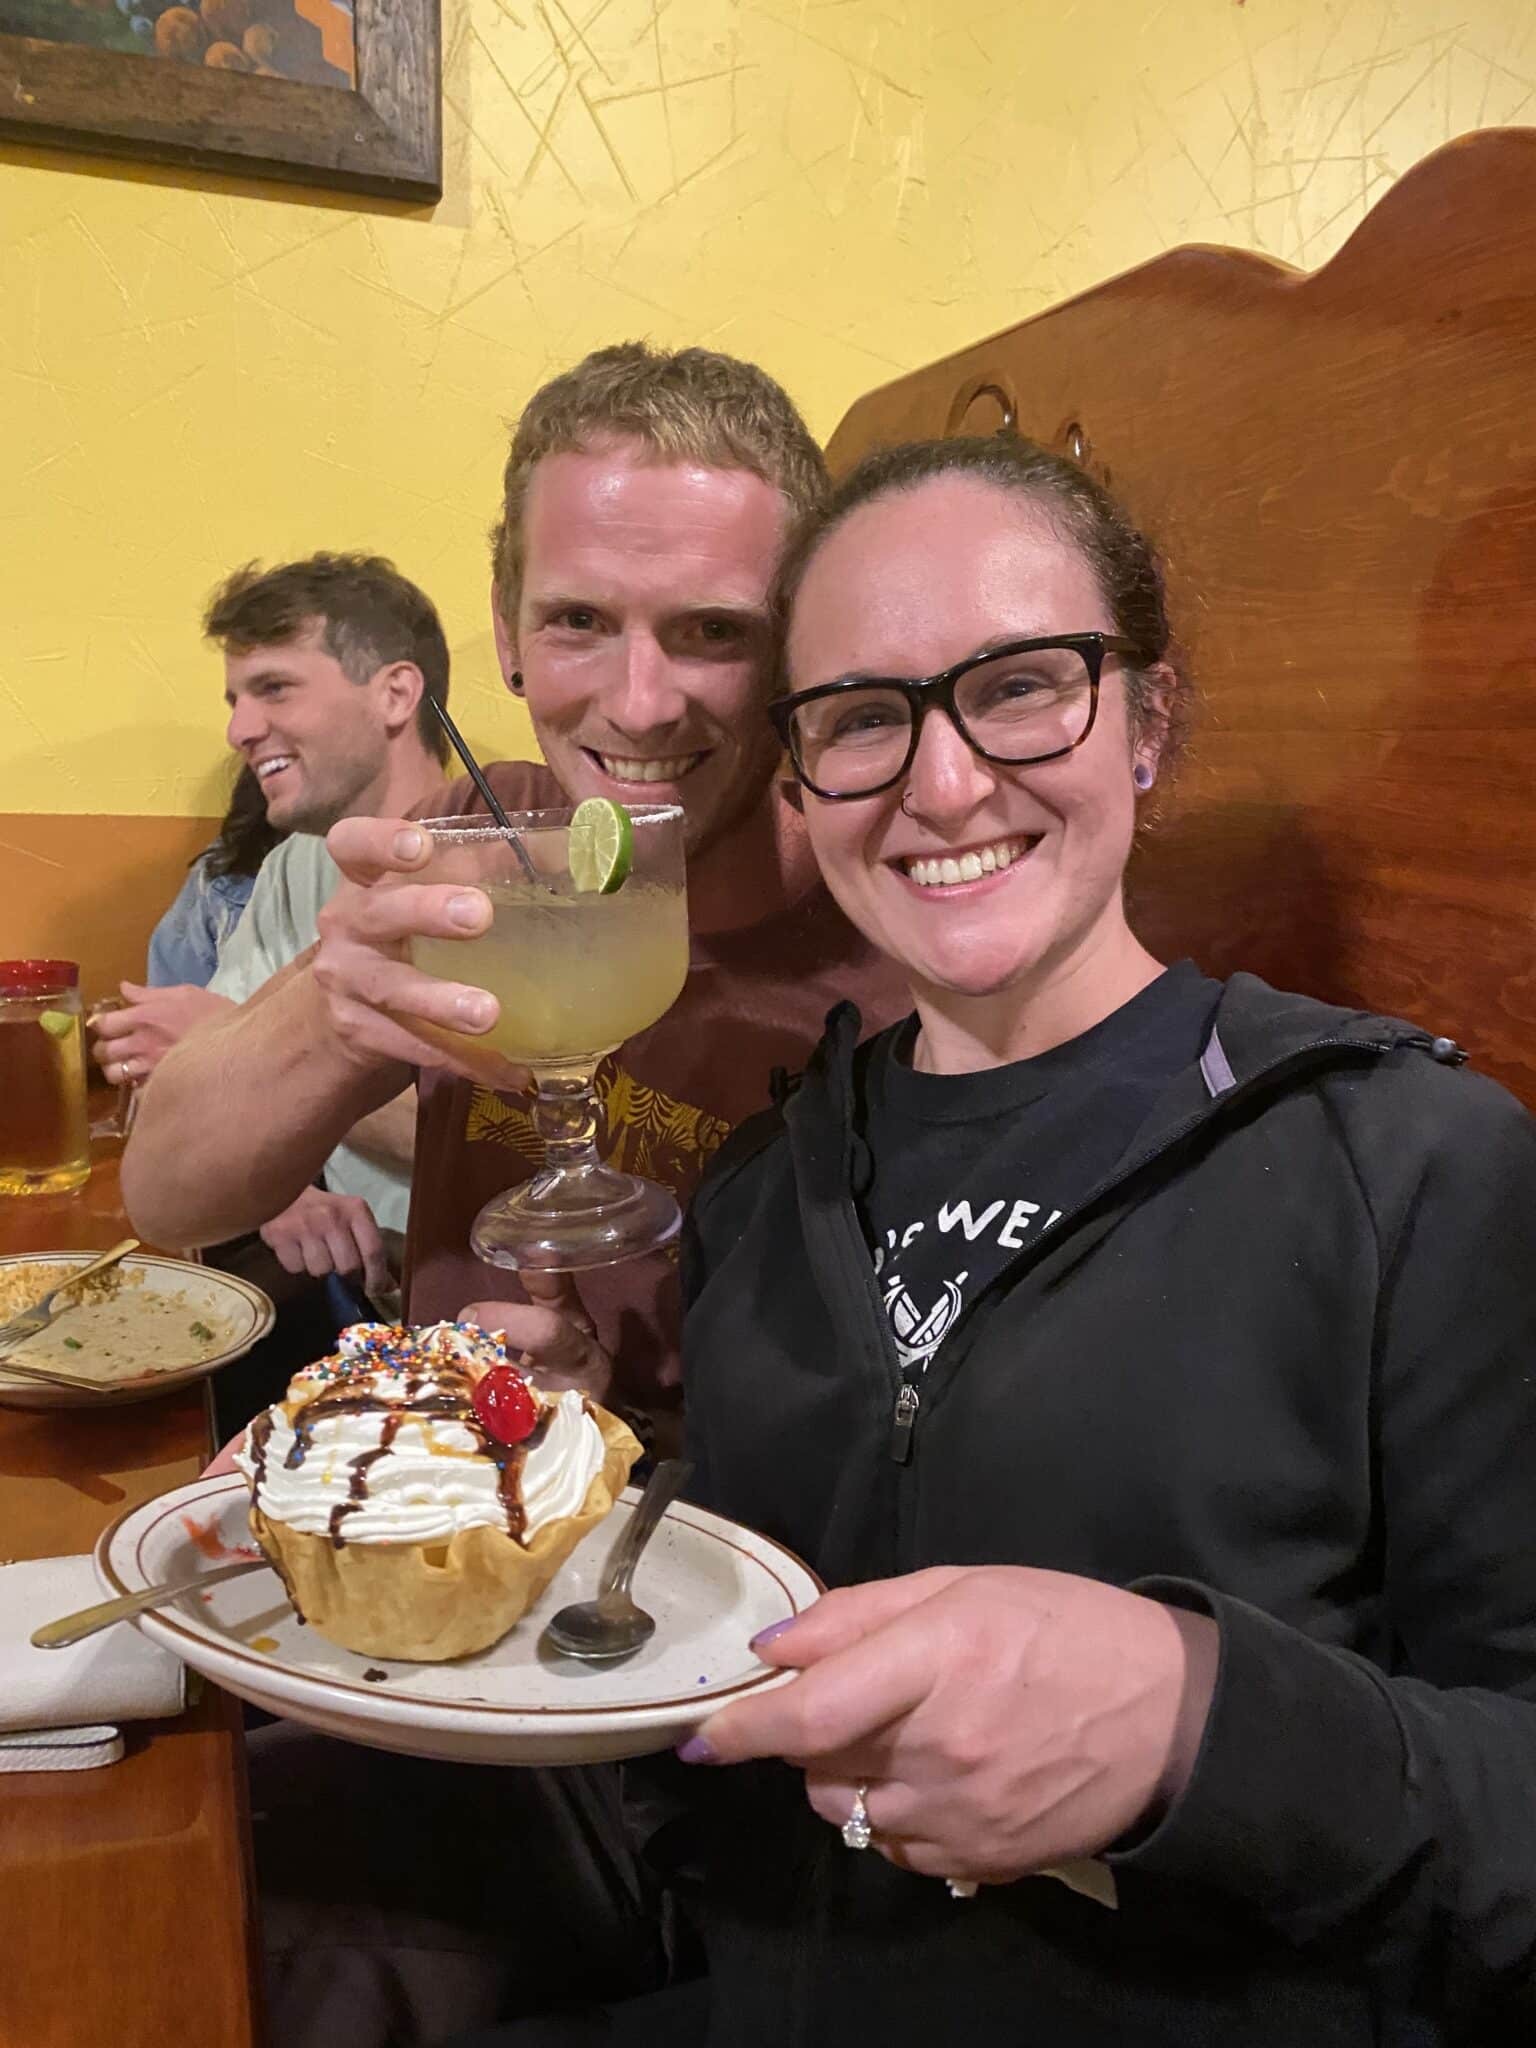 woman with glasses wears hoodie and holds dessert on plate while man sitting next to her smiles holding a drink